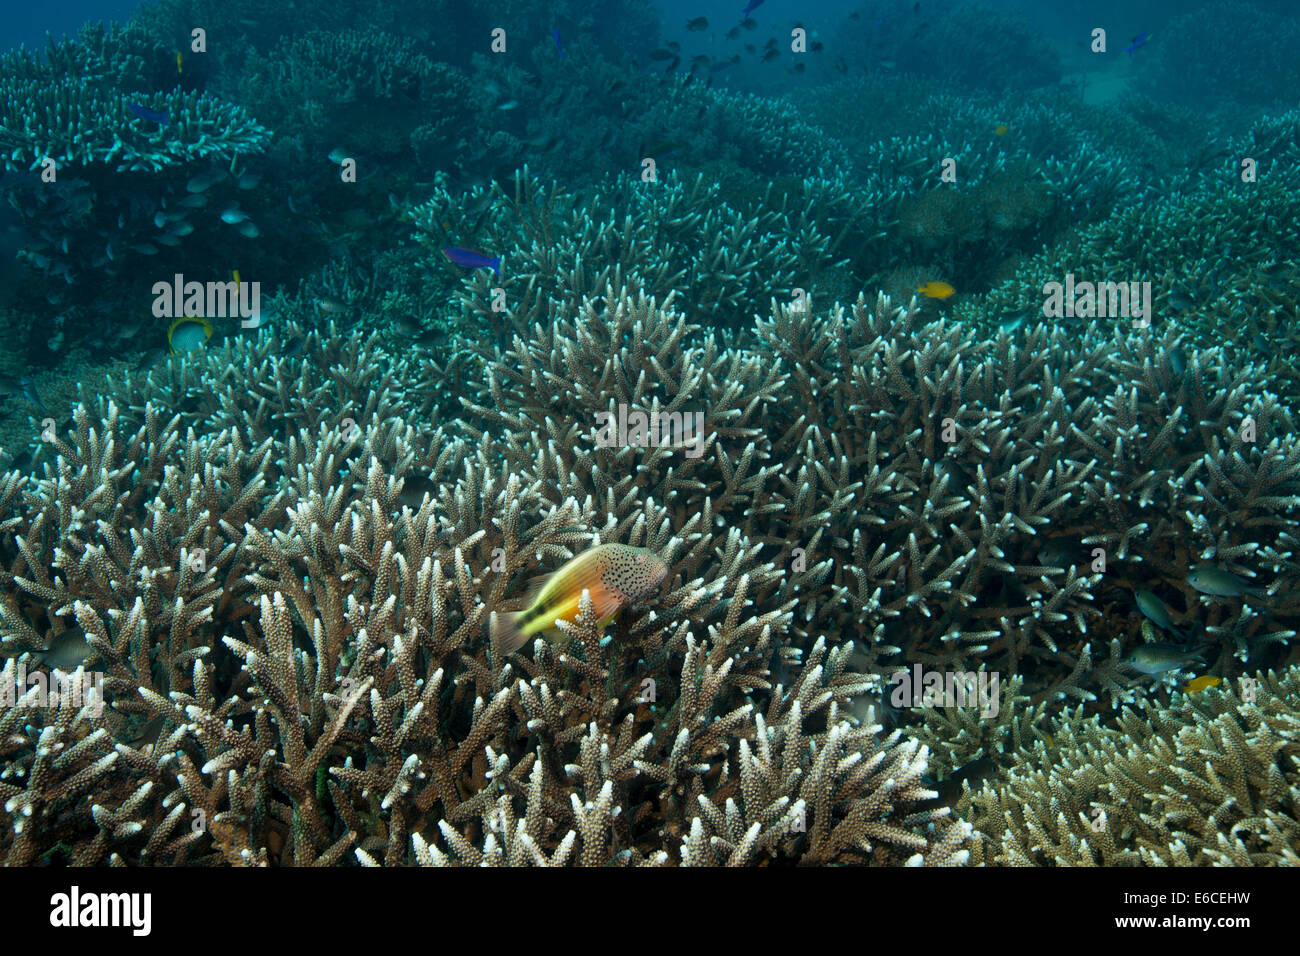 Freckled hawkfish amidst a field of hard corals. Stock Photo